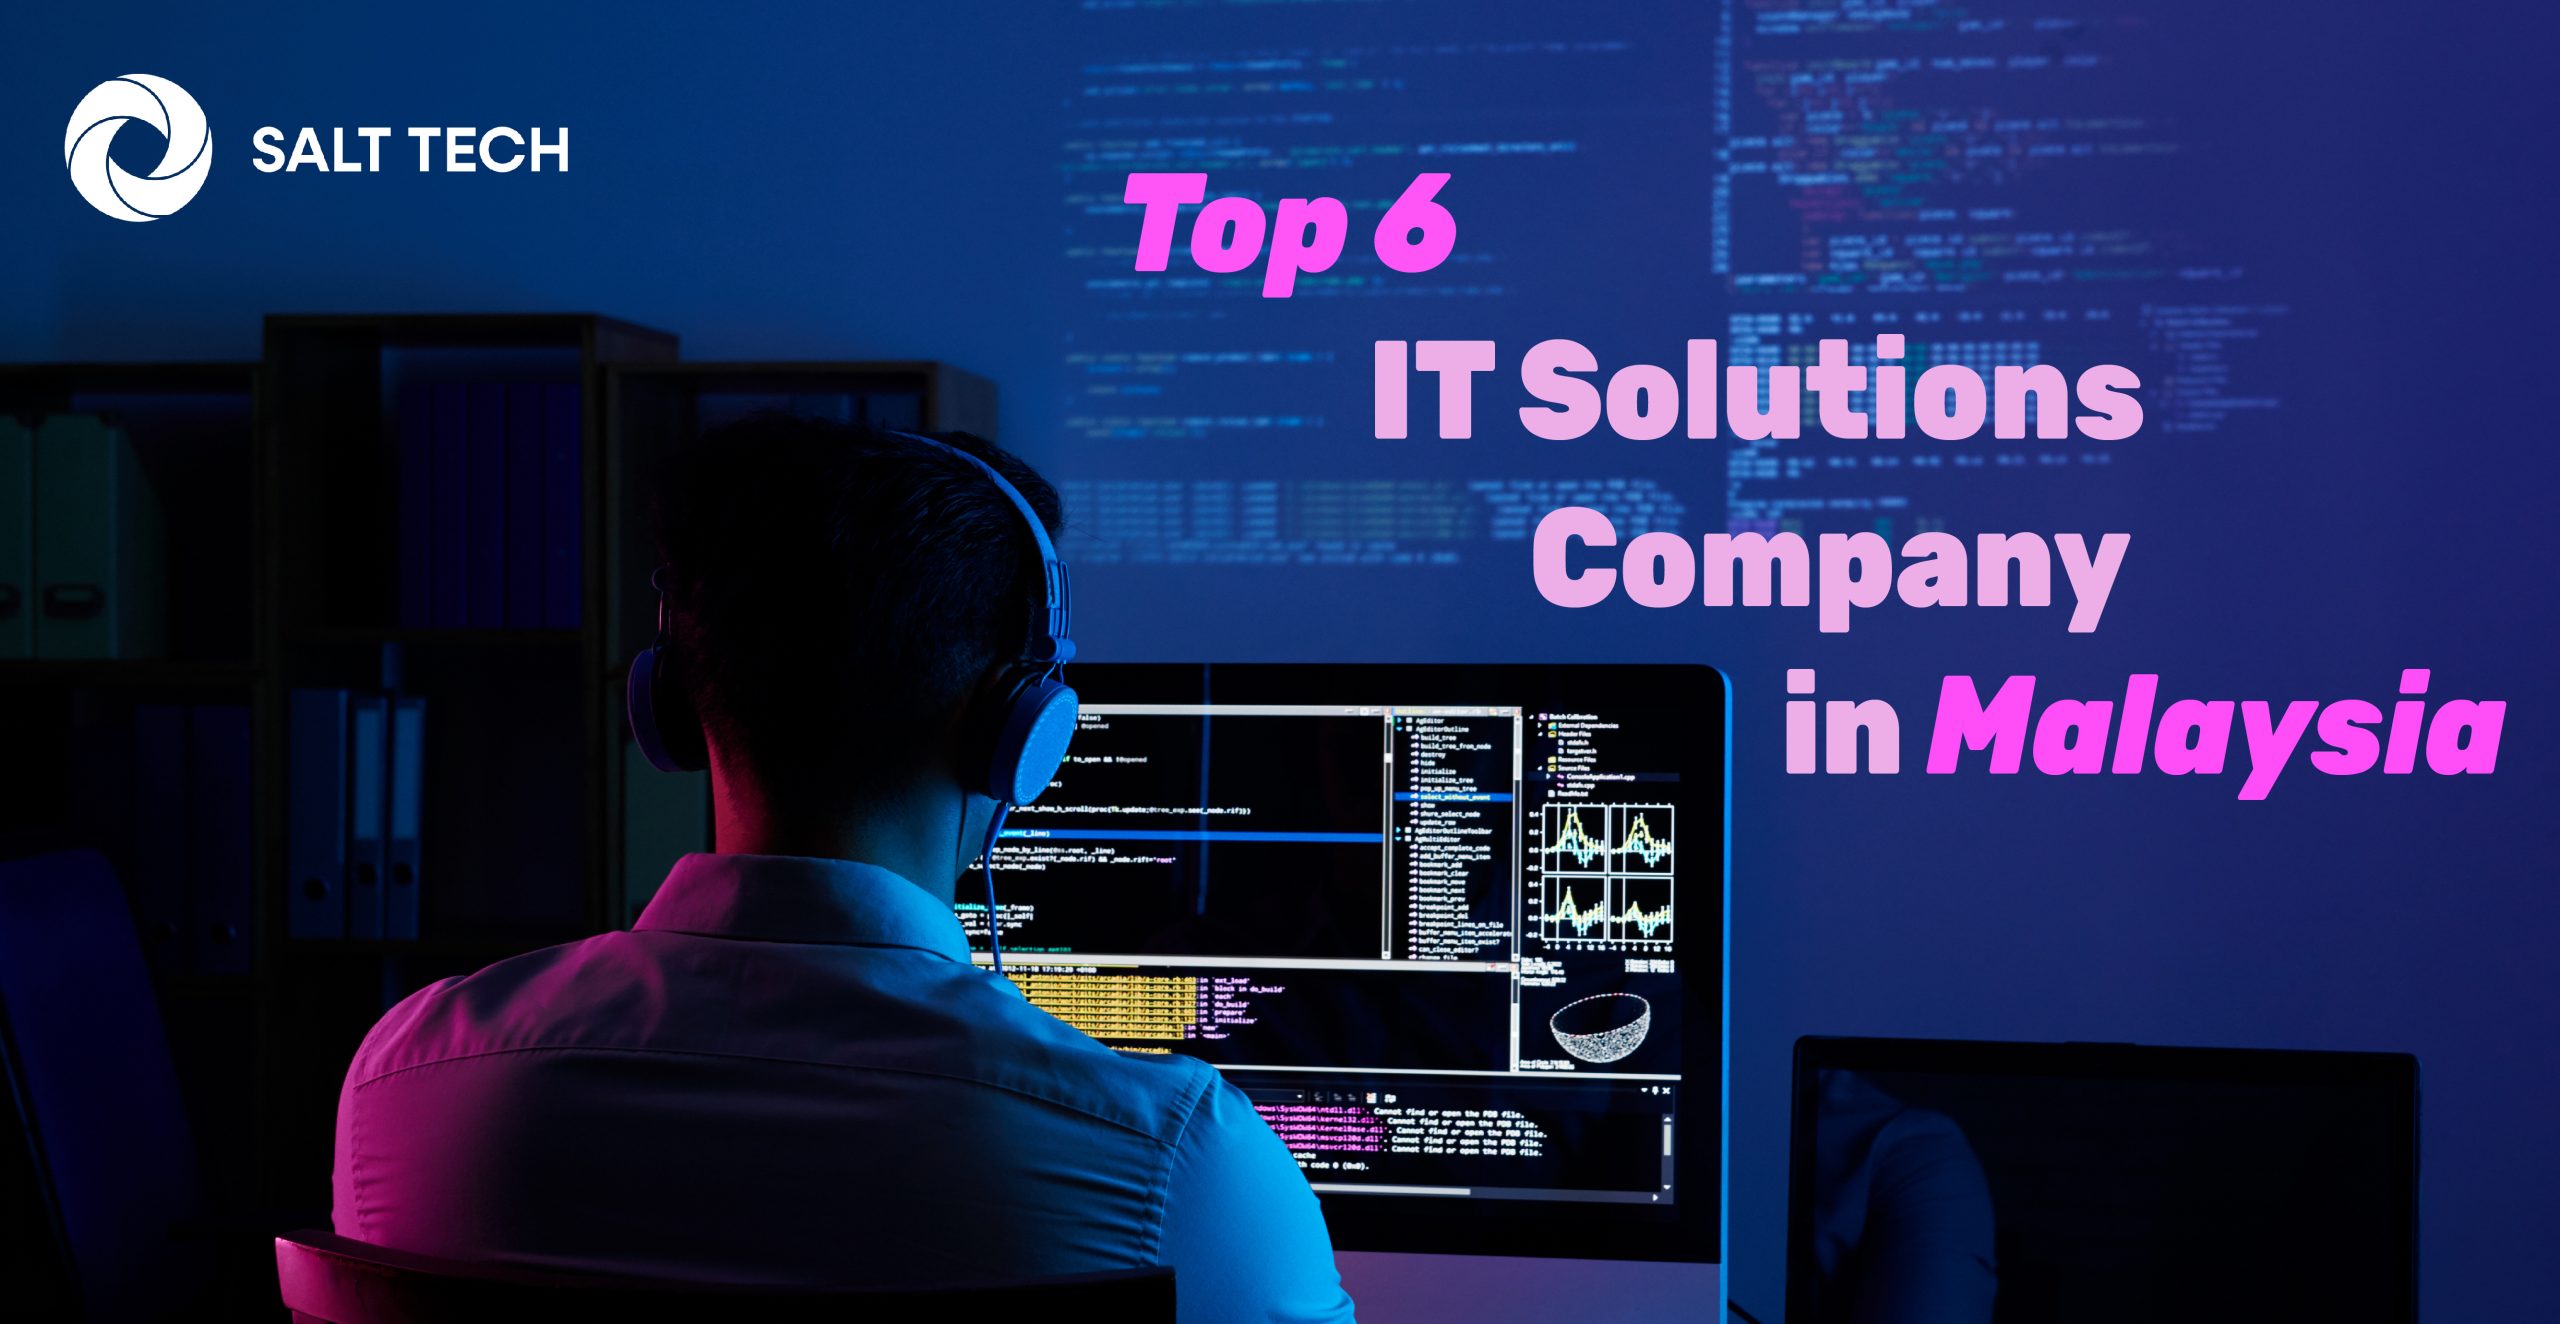 SALT TECH- Top 6 IT Solutions Company in Malaysia